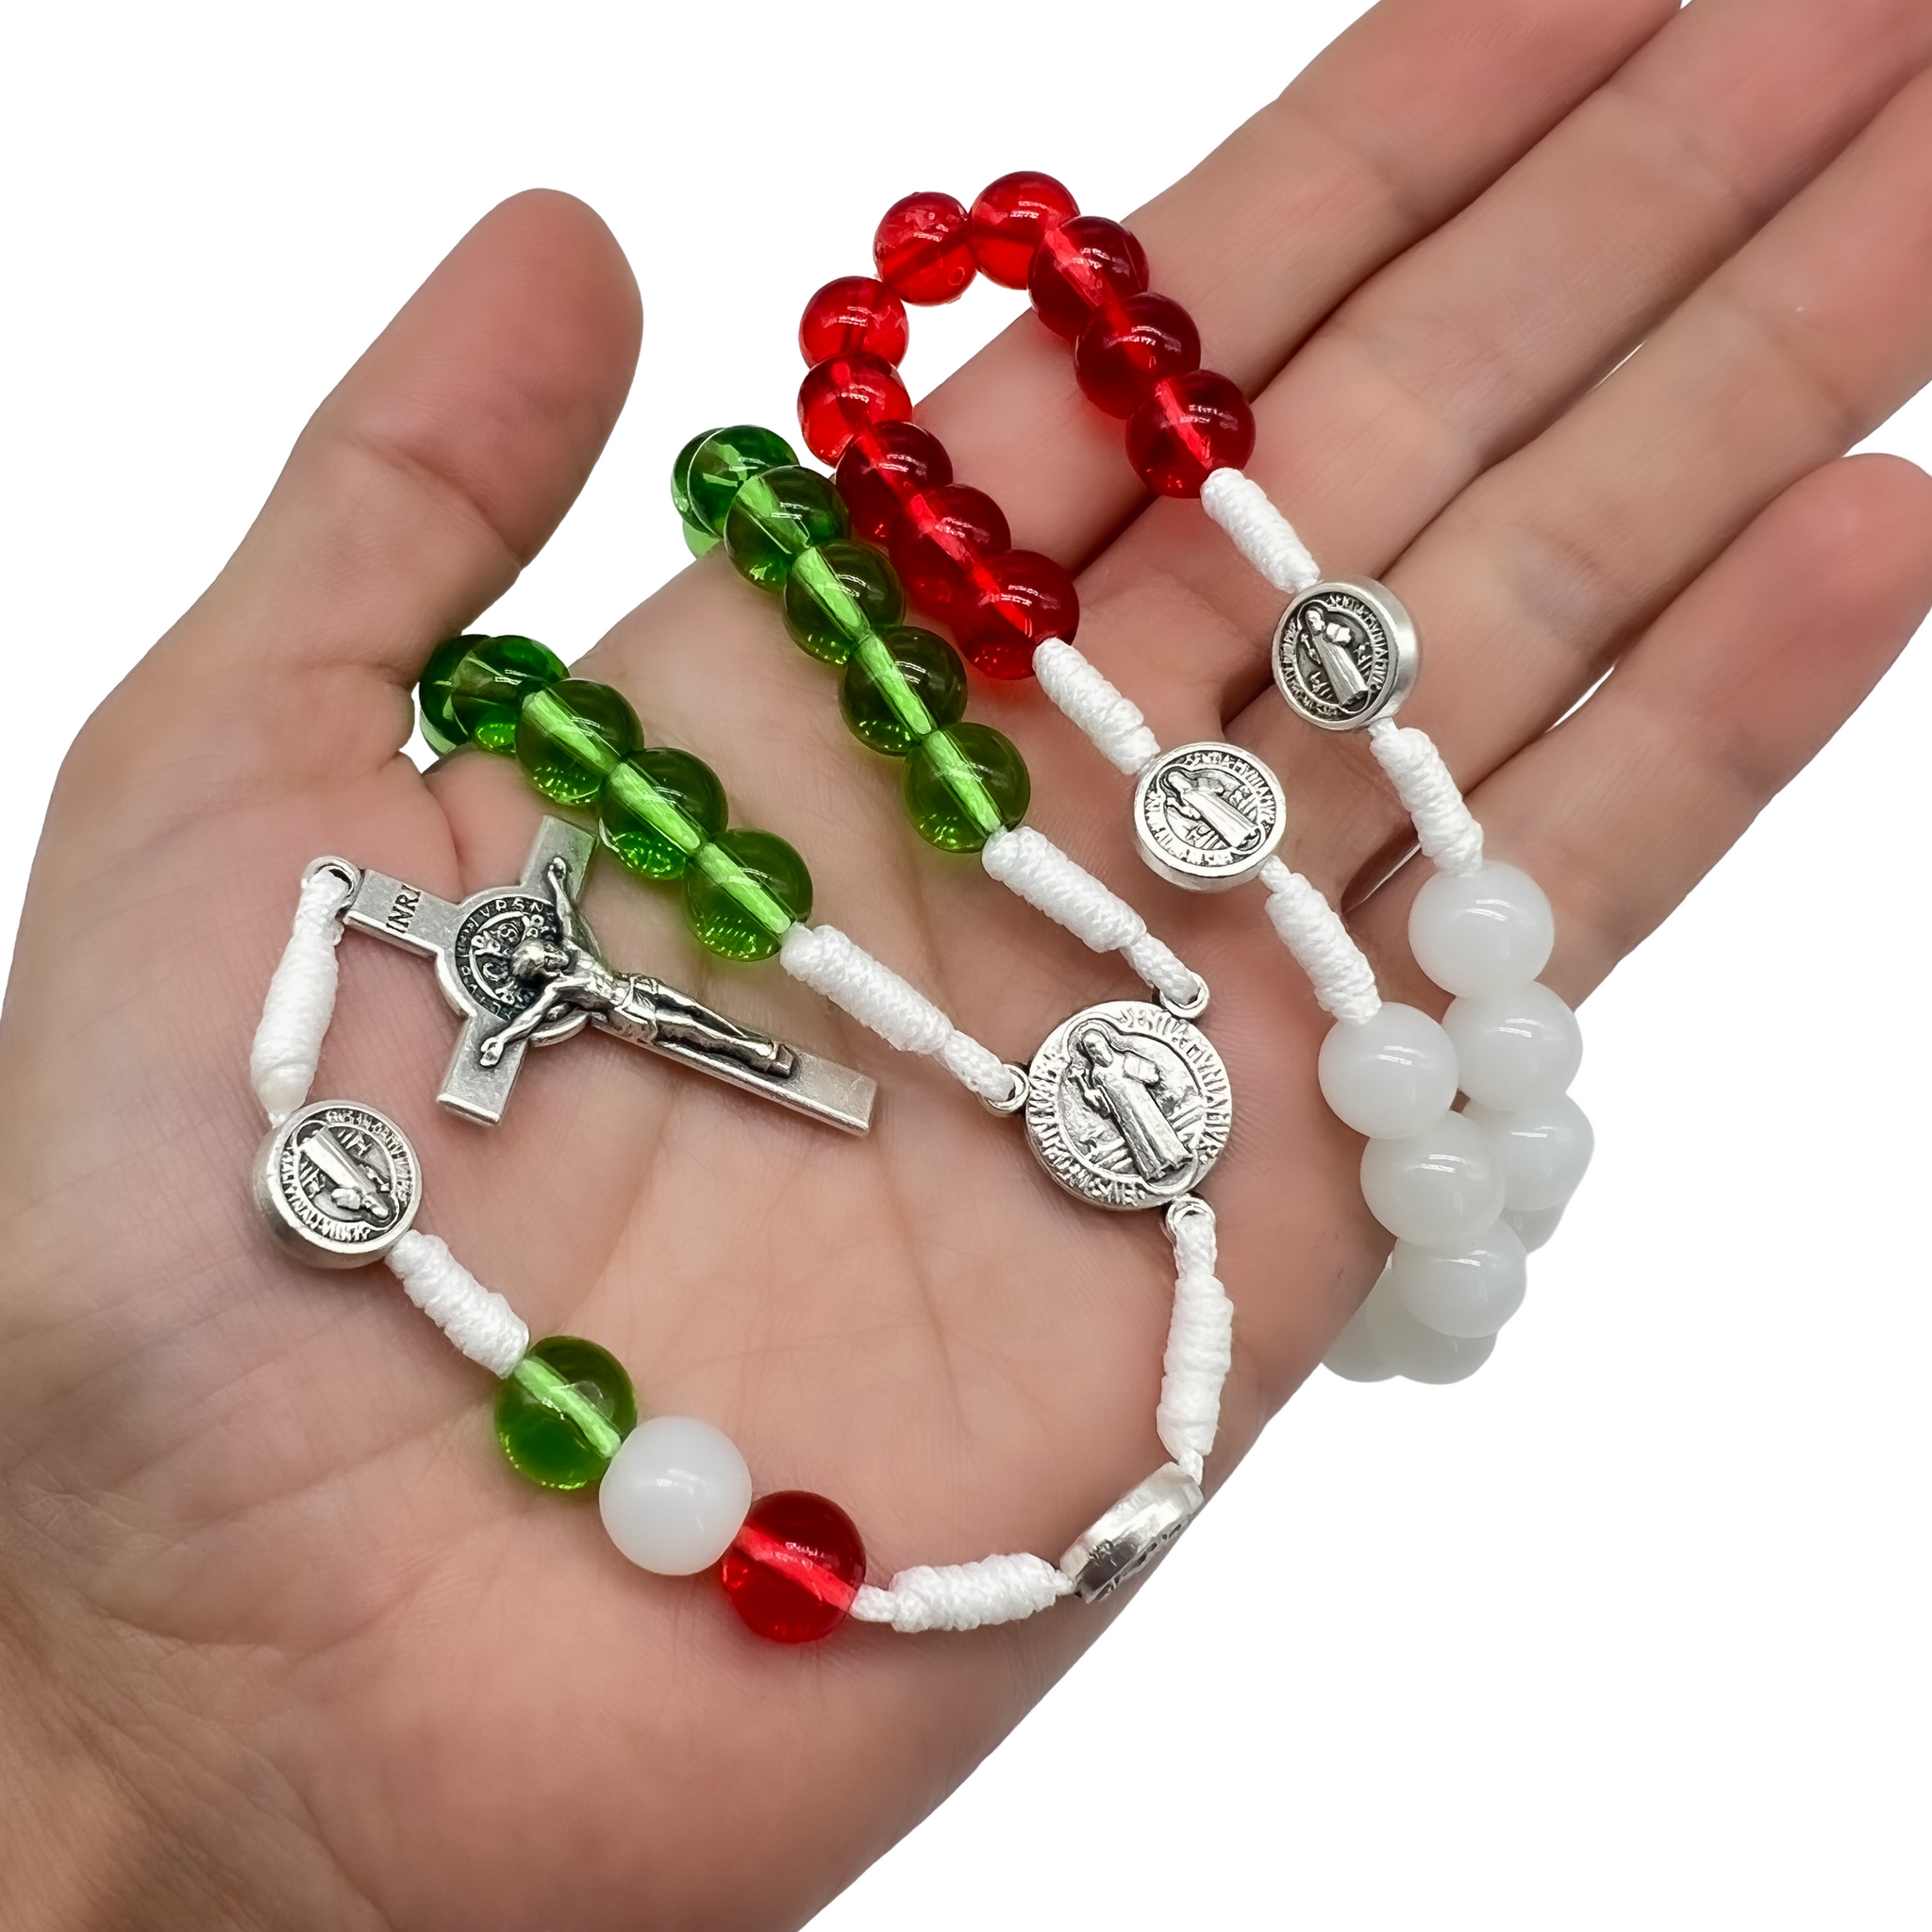 rosaries and rosary-making supplies, from Mexico